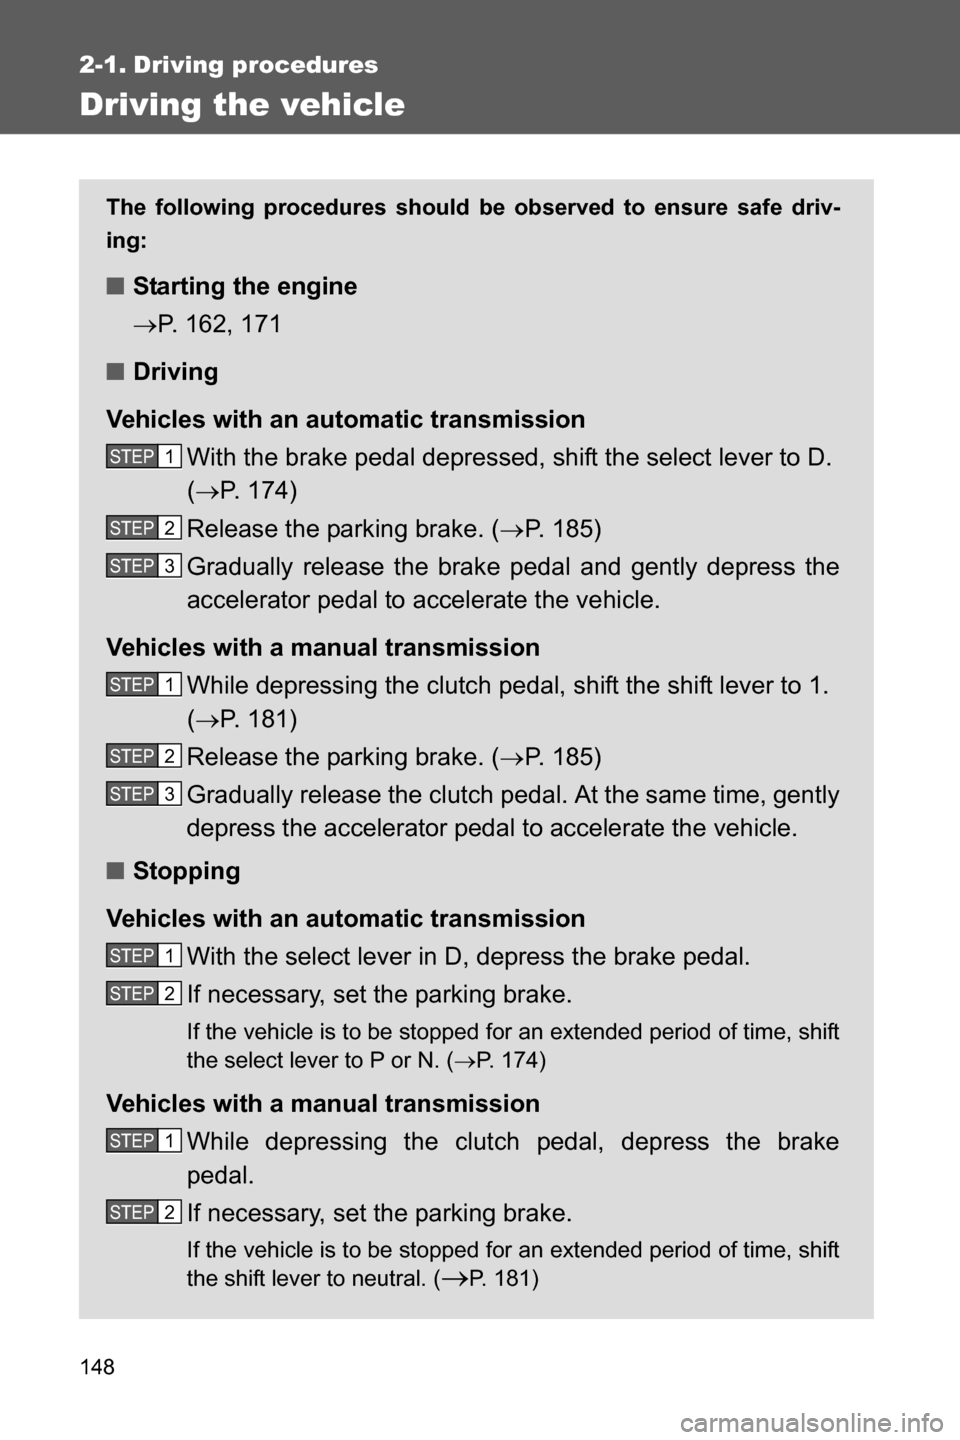 SUBARU BRZ 2016 1.G Owners Manual 148
2-1. Driving procedures
Driving the vehicle
The following procedures should be observed to ensure safe driv-
ing:
■Starting the engine
�oP. 162, 171
■Driving
Vehicles with an automatic transmi